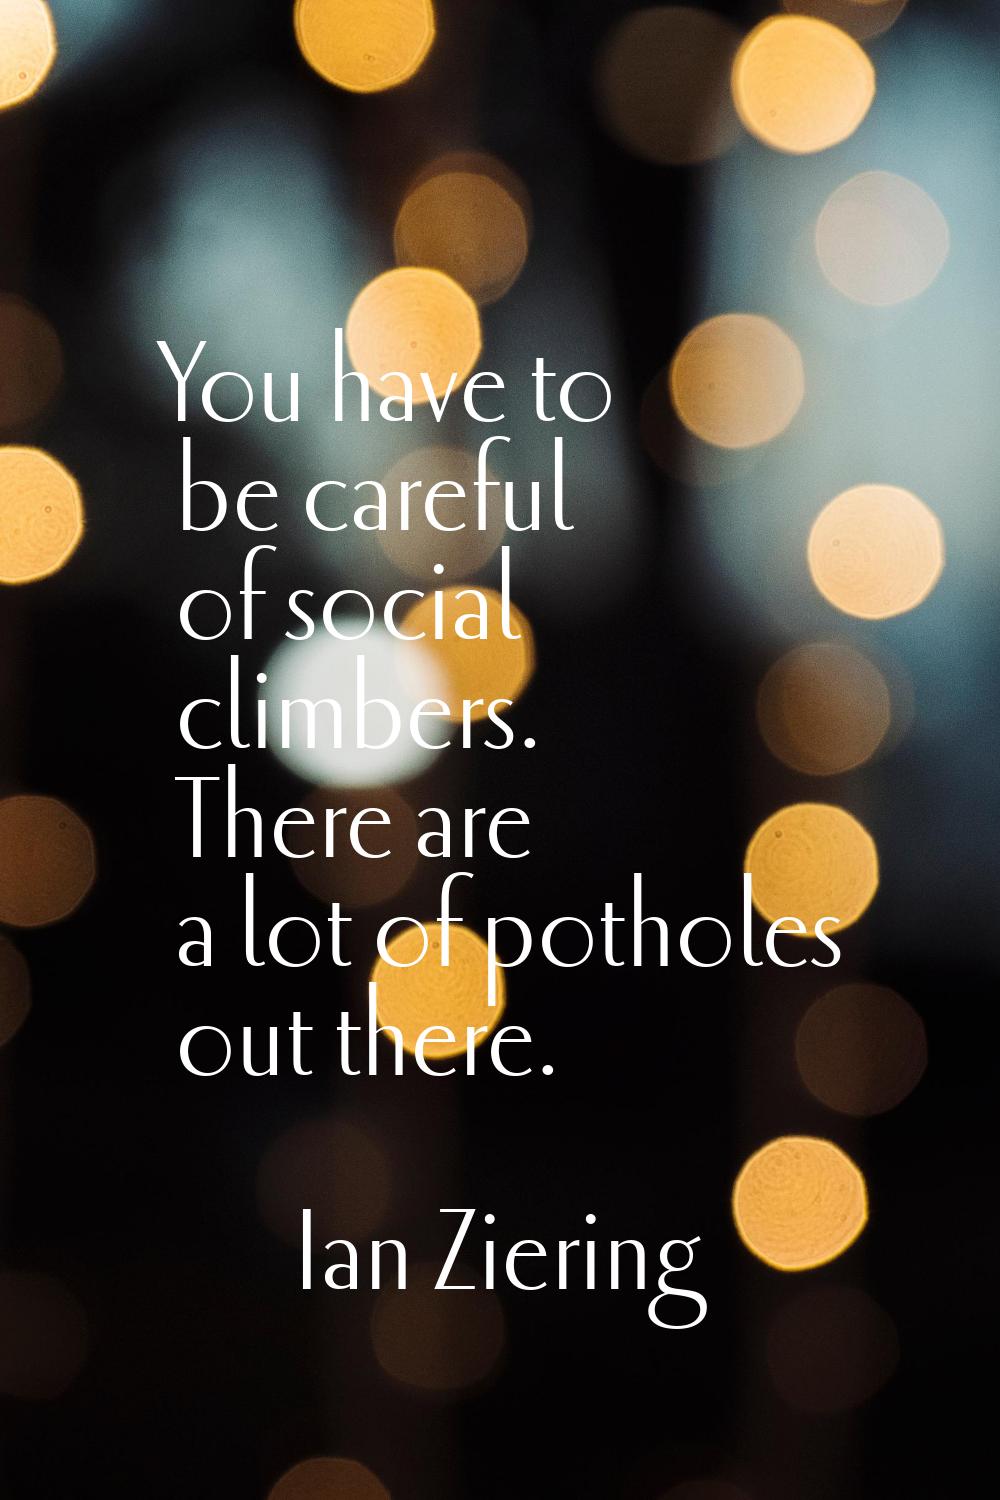 You have to be careful of social climbers. There are a lot of potholes out there.